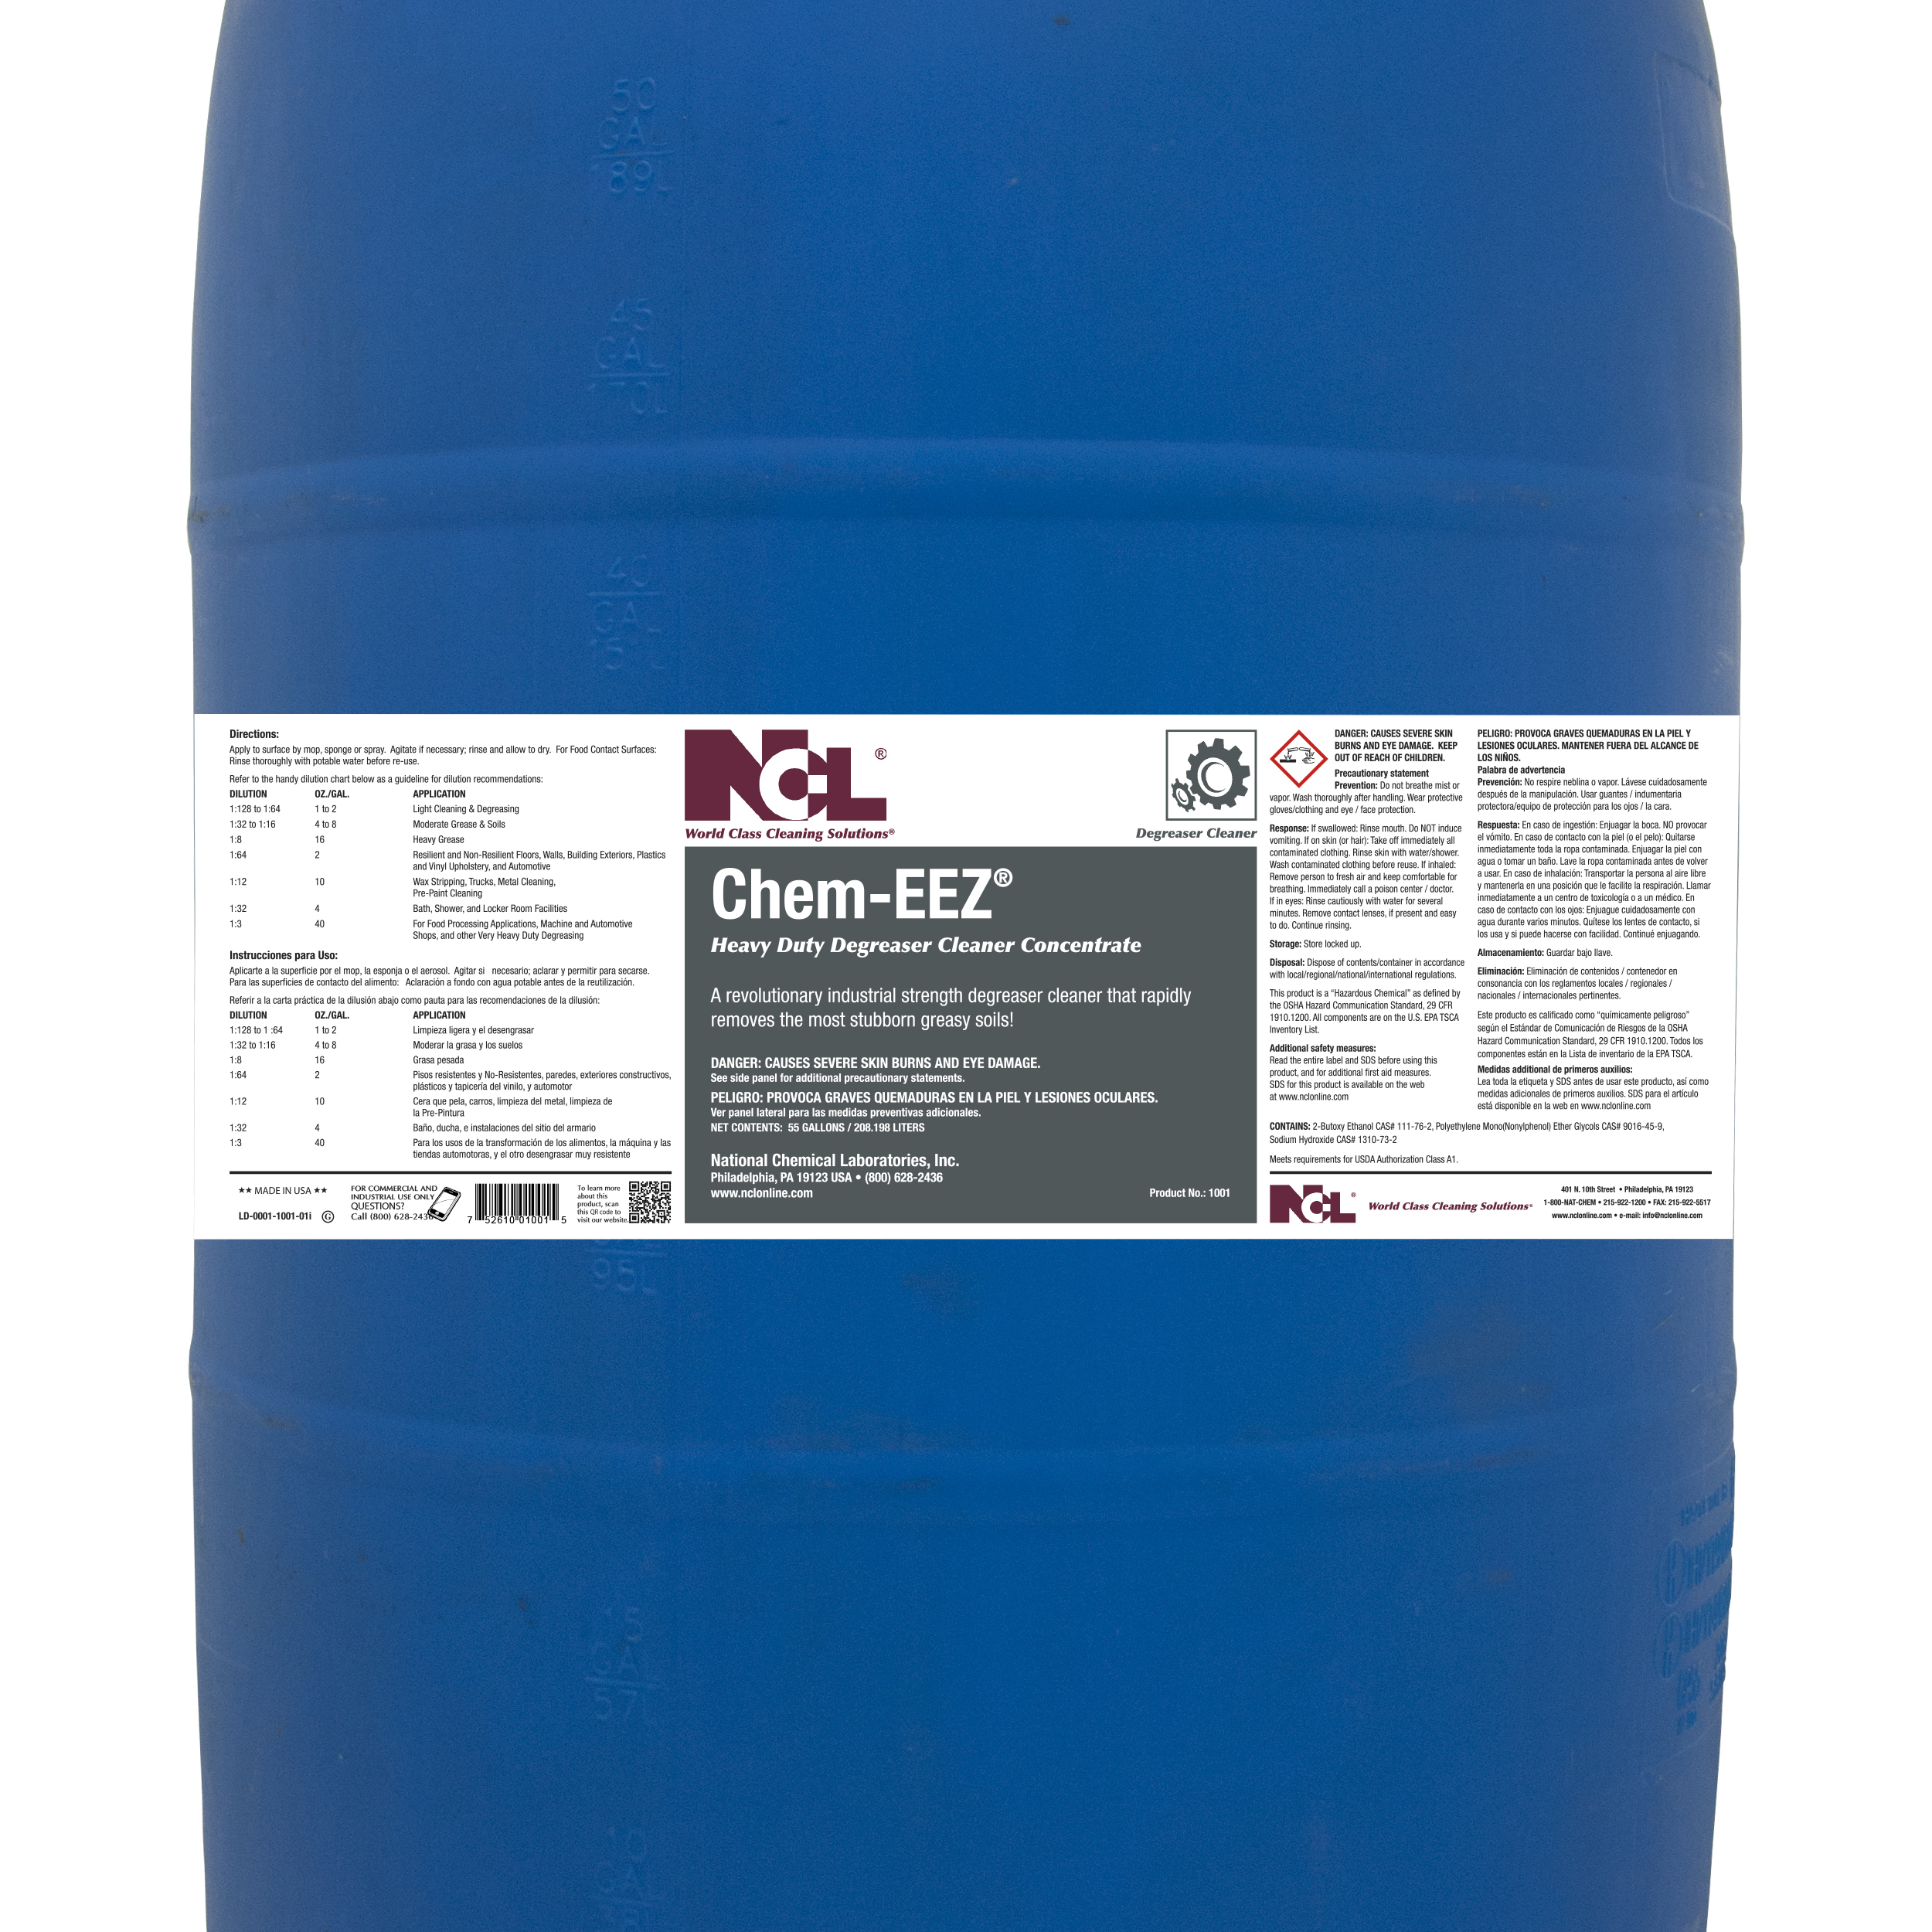  CHEM-EEZ Heavy Duty Degreaser Cleaner 55 Gallon Drum (NCL1001-18) 